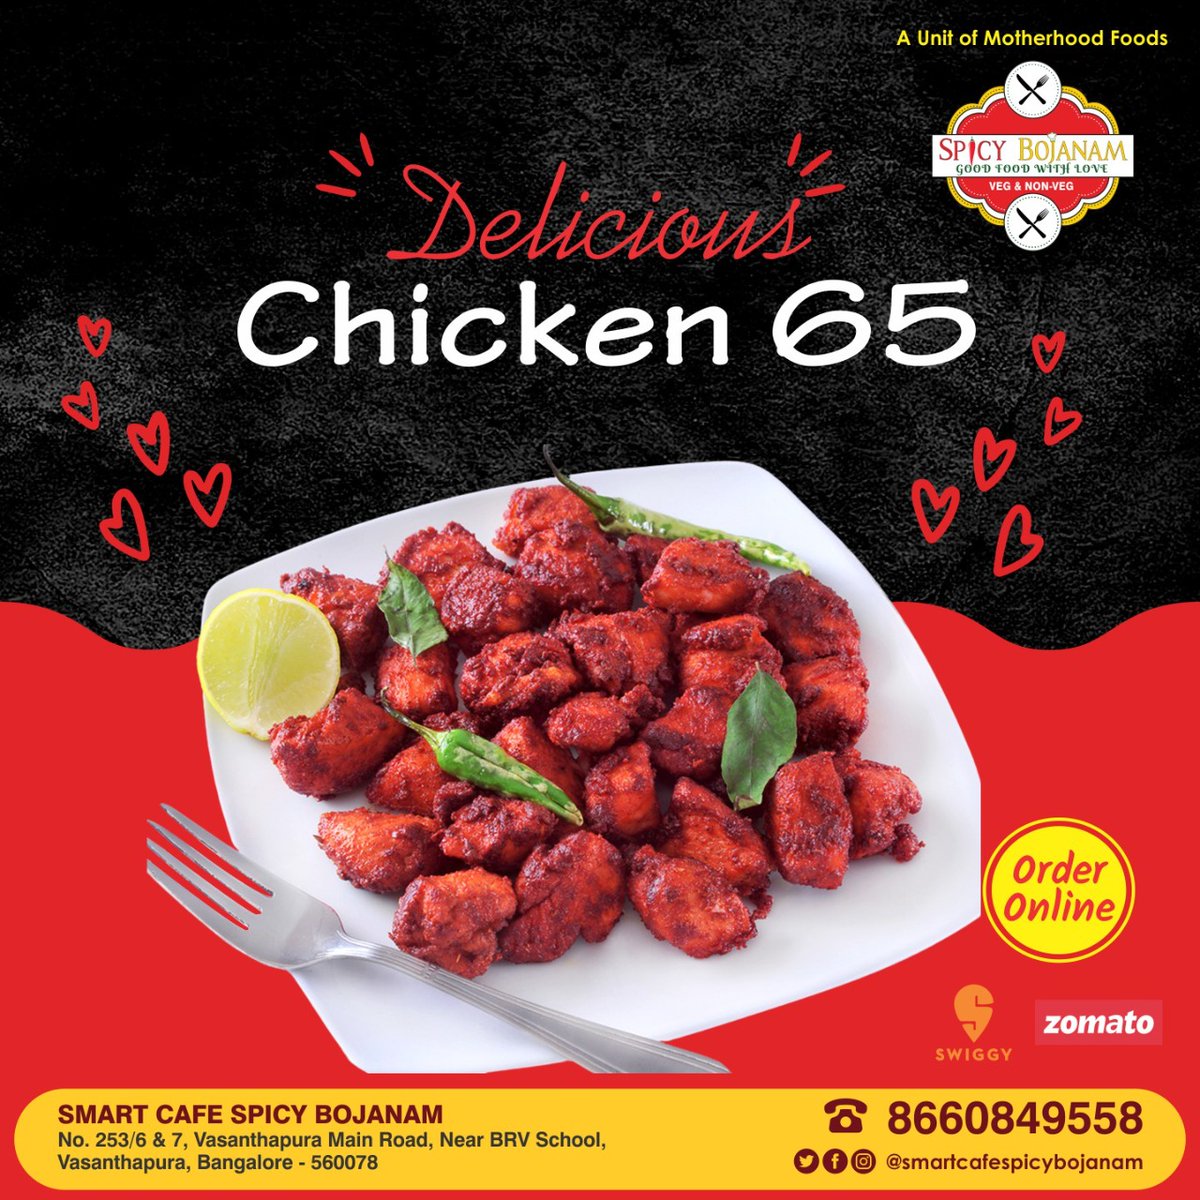 Spice up your weekend with our delicious chicken 65  marinated with freshly crushed spices. Lip-smacking taste in every bite.

#andrafood #foodlover #nonveg #spicyfood #bangalore #smartcafe #spicybojanam #grillchicken #chicken #restaurant #hotel